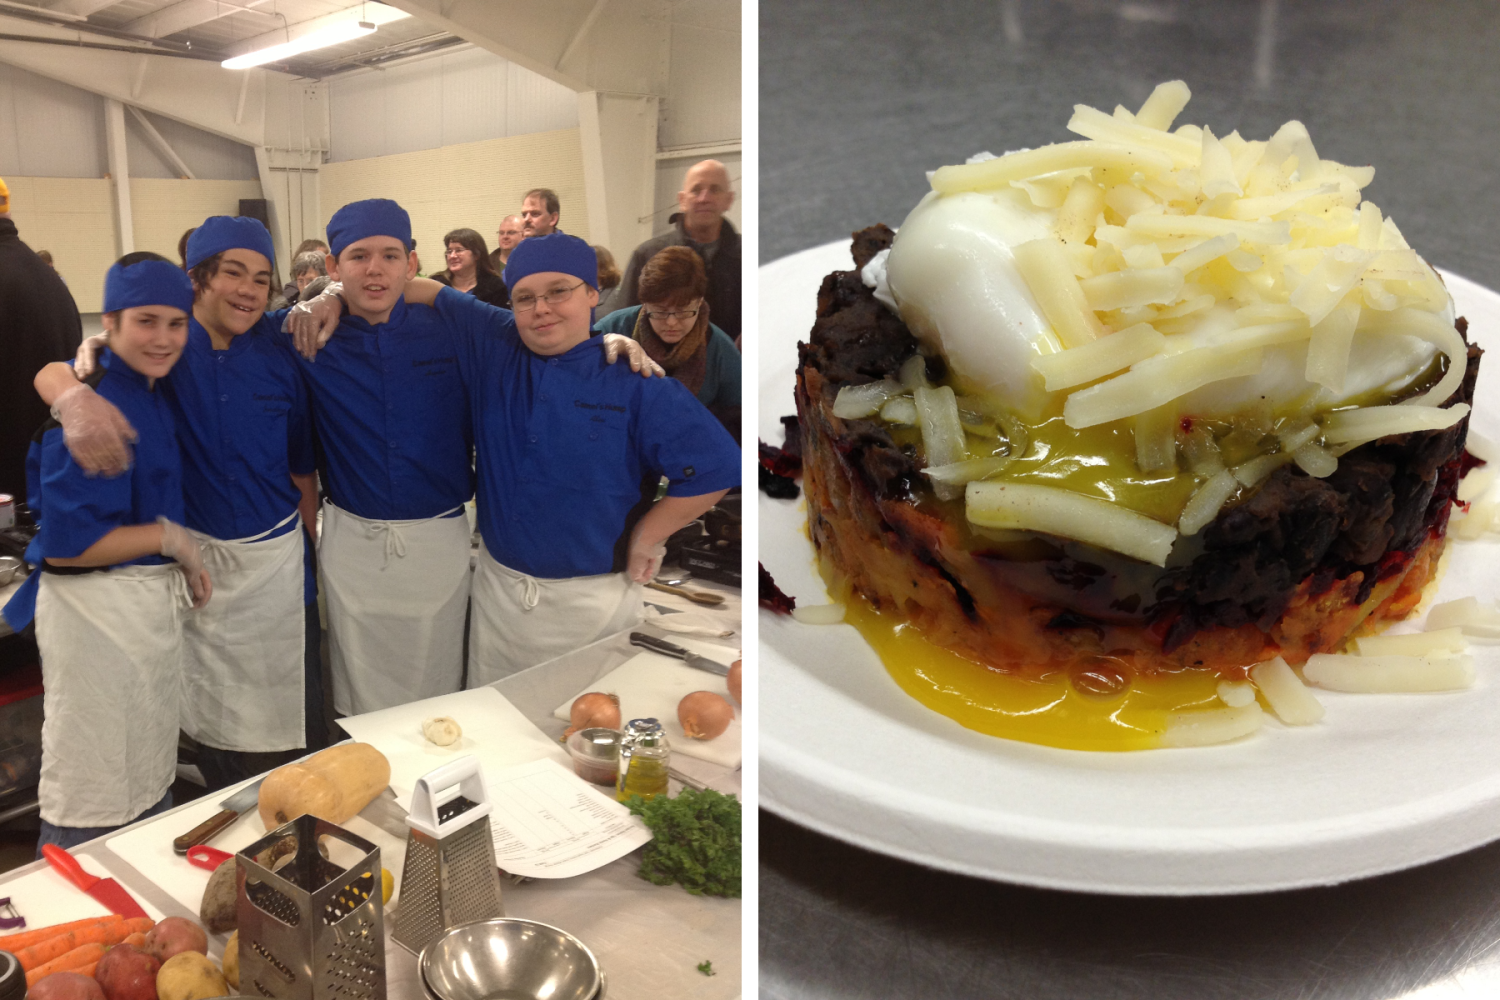 Left: Four boys of the Camels Hump Middle School during the Jr Iron Chef VT competition. Right: a dish of tricolored potatoes stacked and topped with cheese.